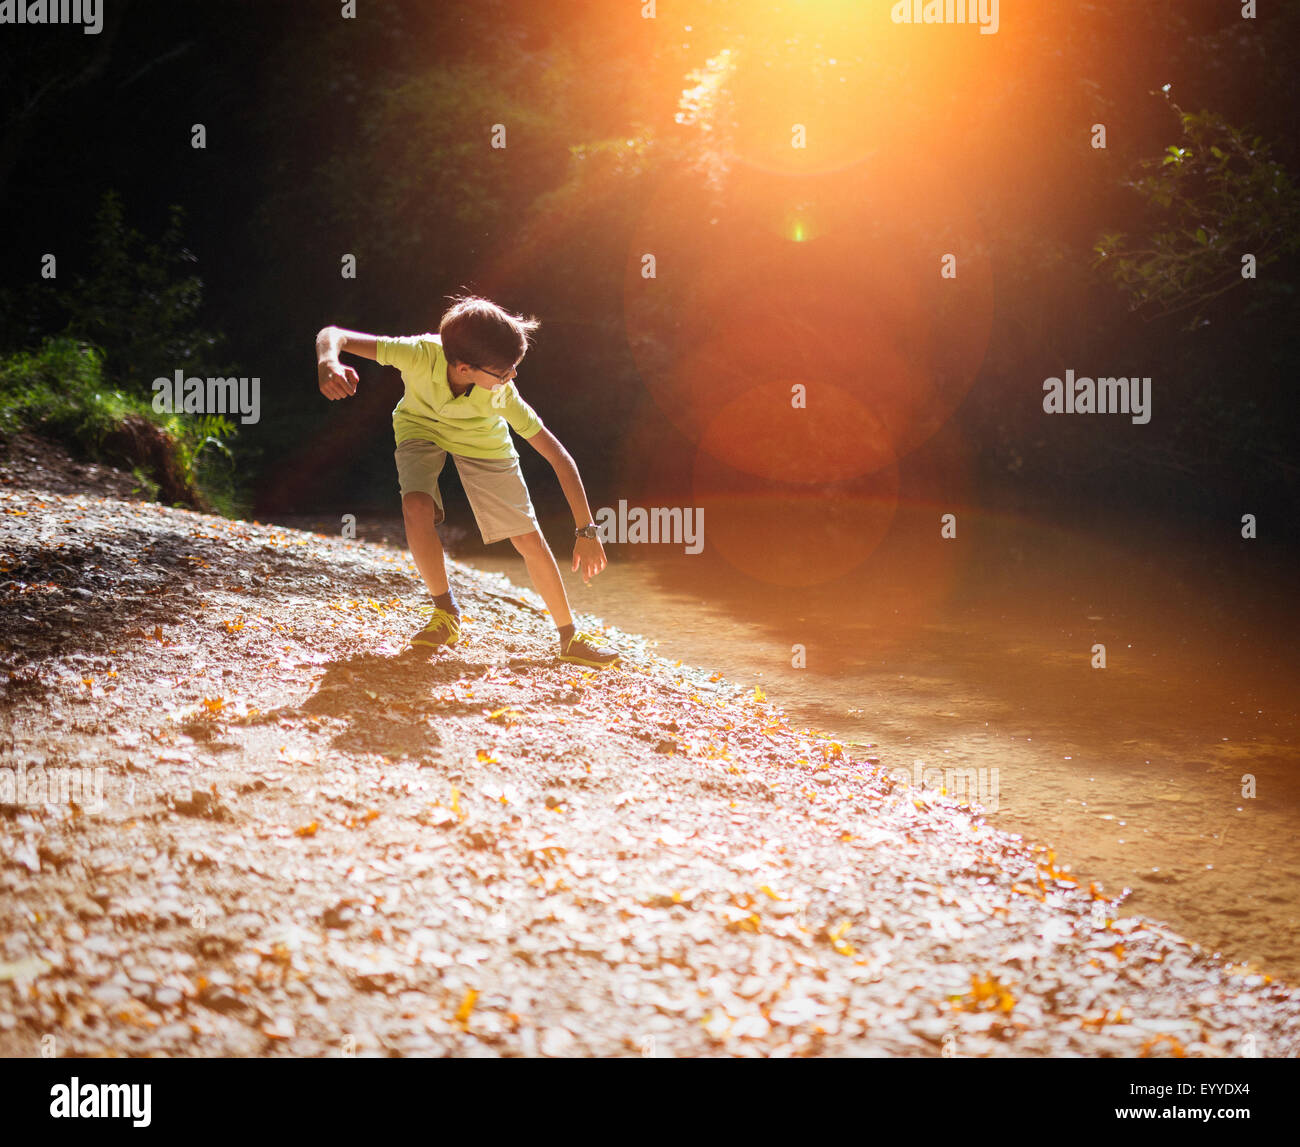 Mixed race boy skipping stones in stream Stock Photo